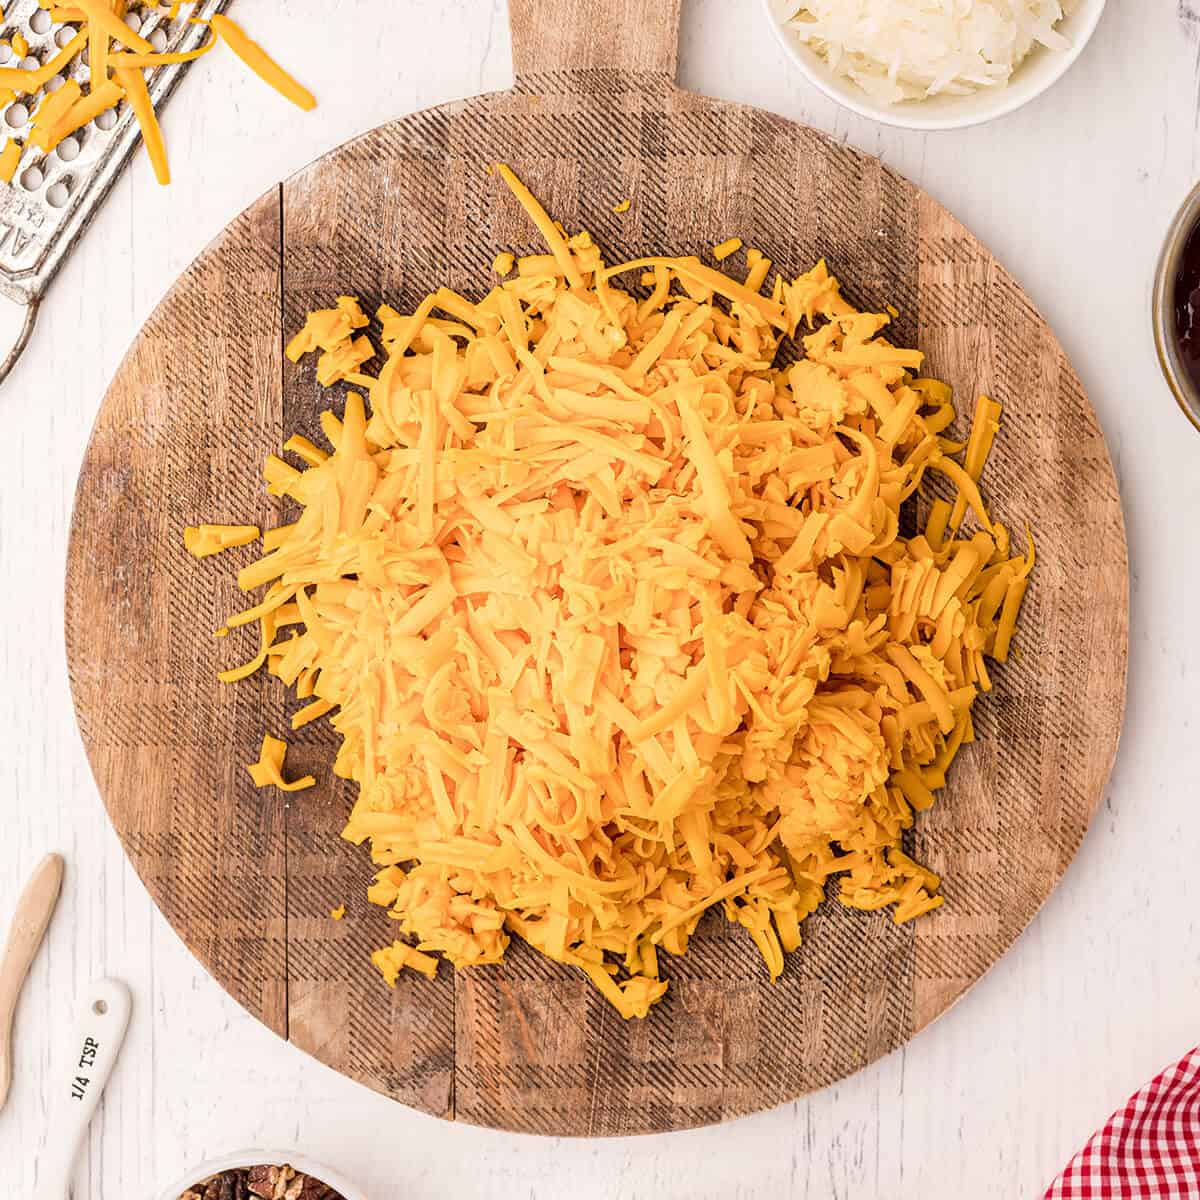 Grated cheese on a wooden board.